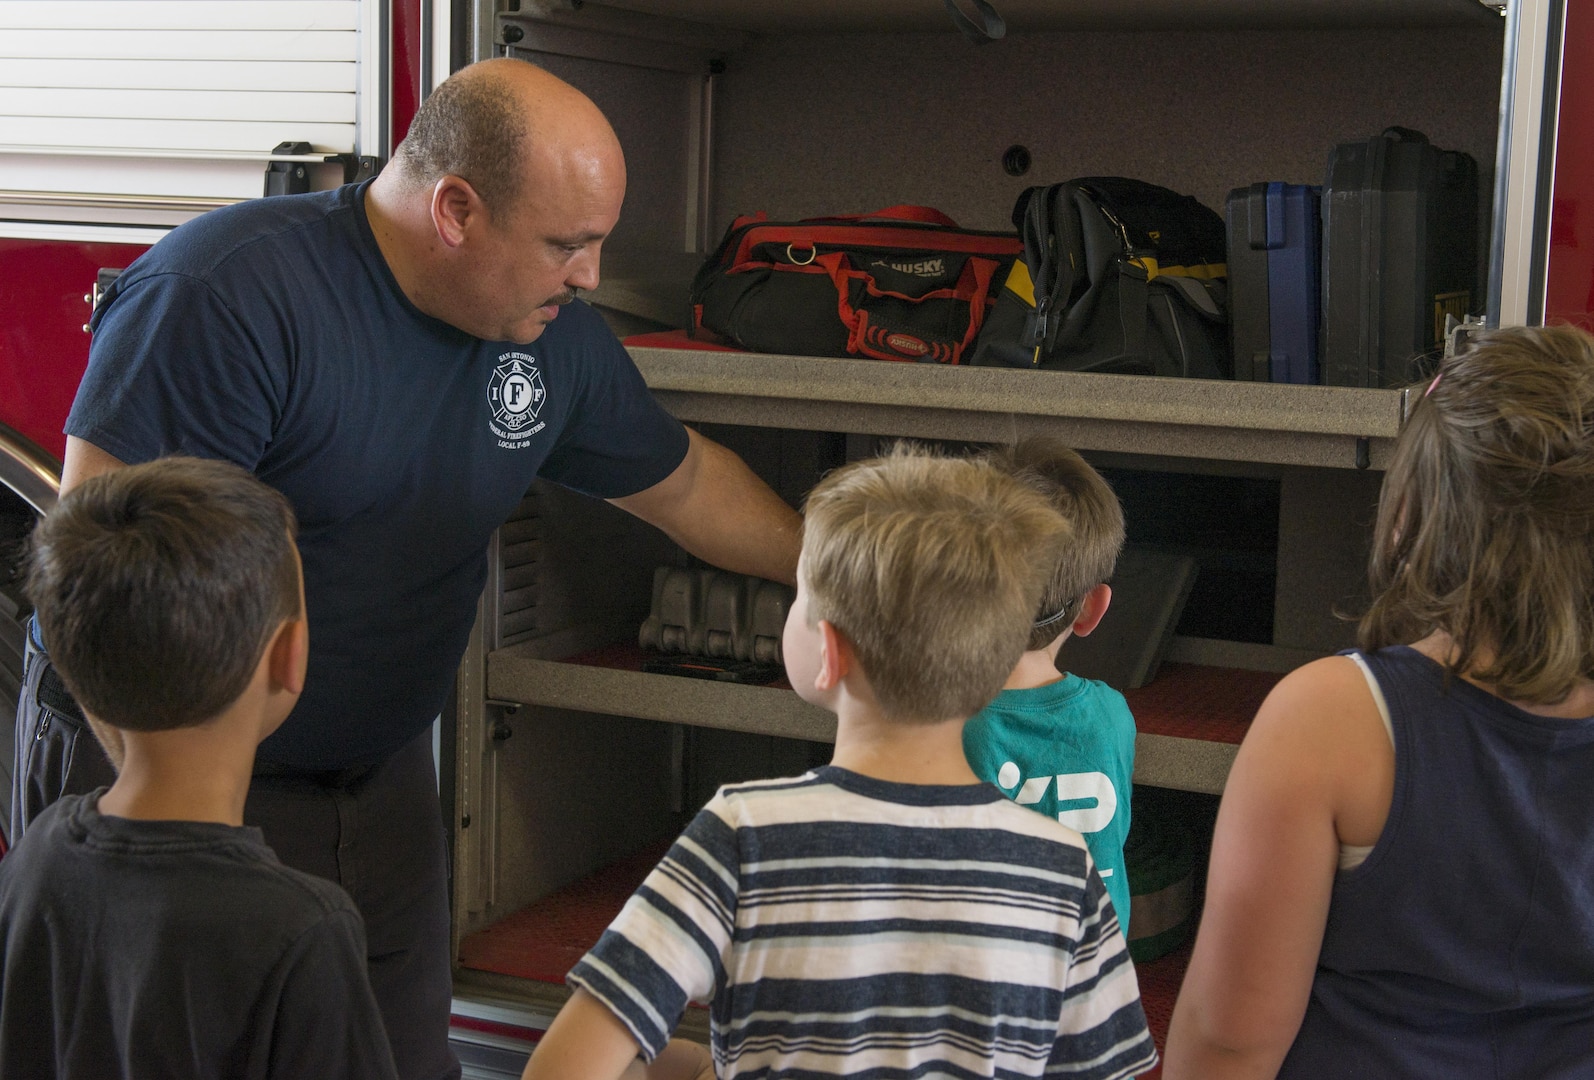 Avery Carter, 502nd Civil Engineering Squadron firefighter, shows children from Vibrant ABA Solutions the various kinds of equipment they use when there is an emergency during a open house tour of Fire Station 2 June 23, 2017, at Joint Base San Antonio-Lackland, Texas. (U.S. Air Force photo by Senior Airman Krystal Wright)